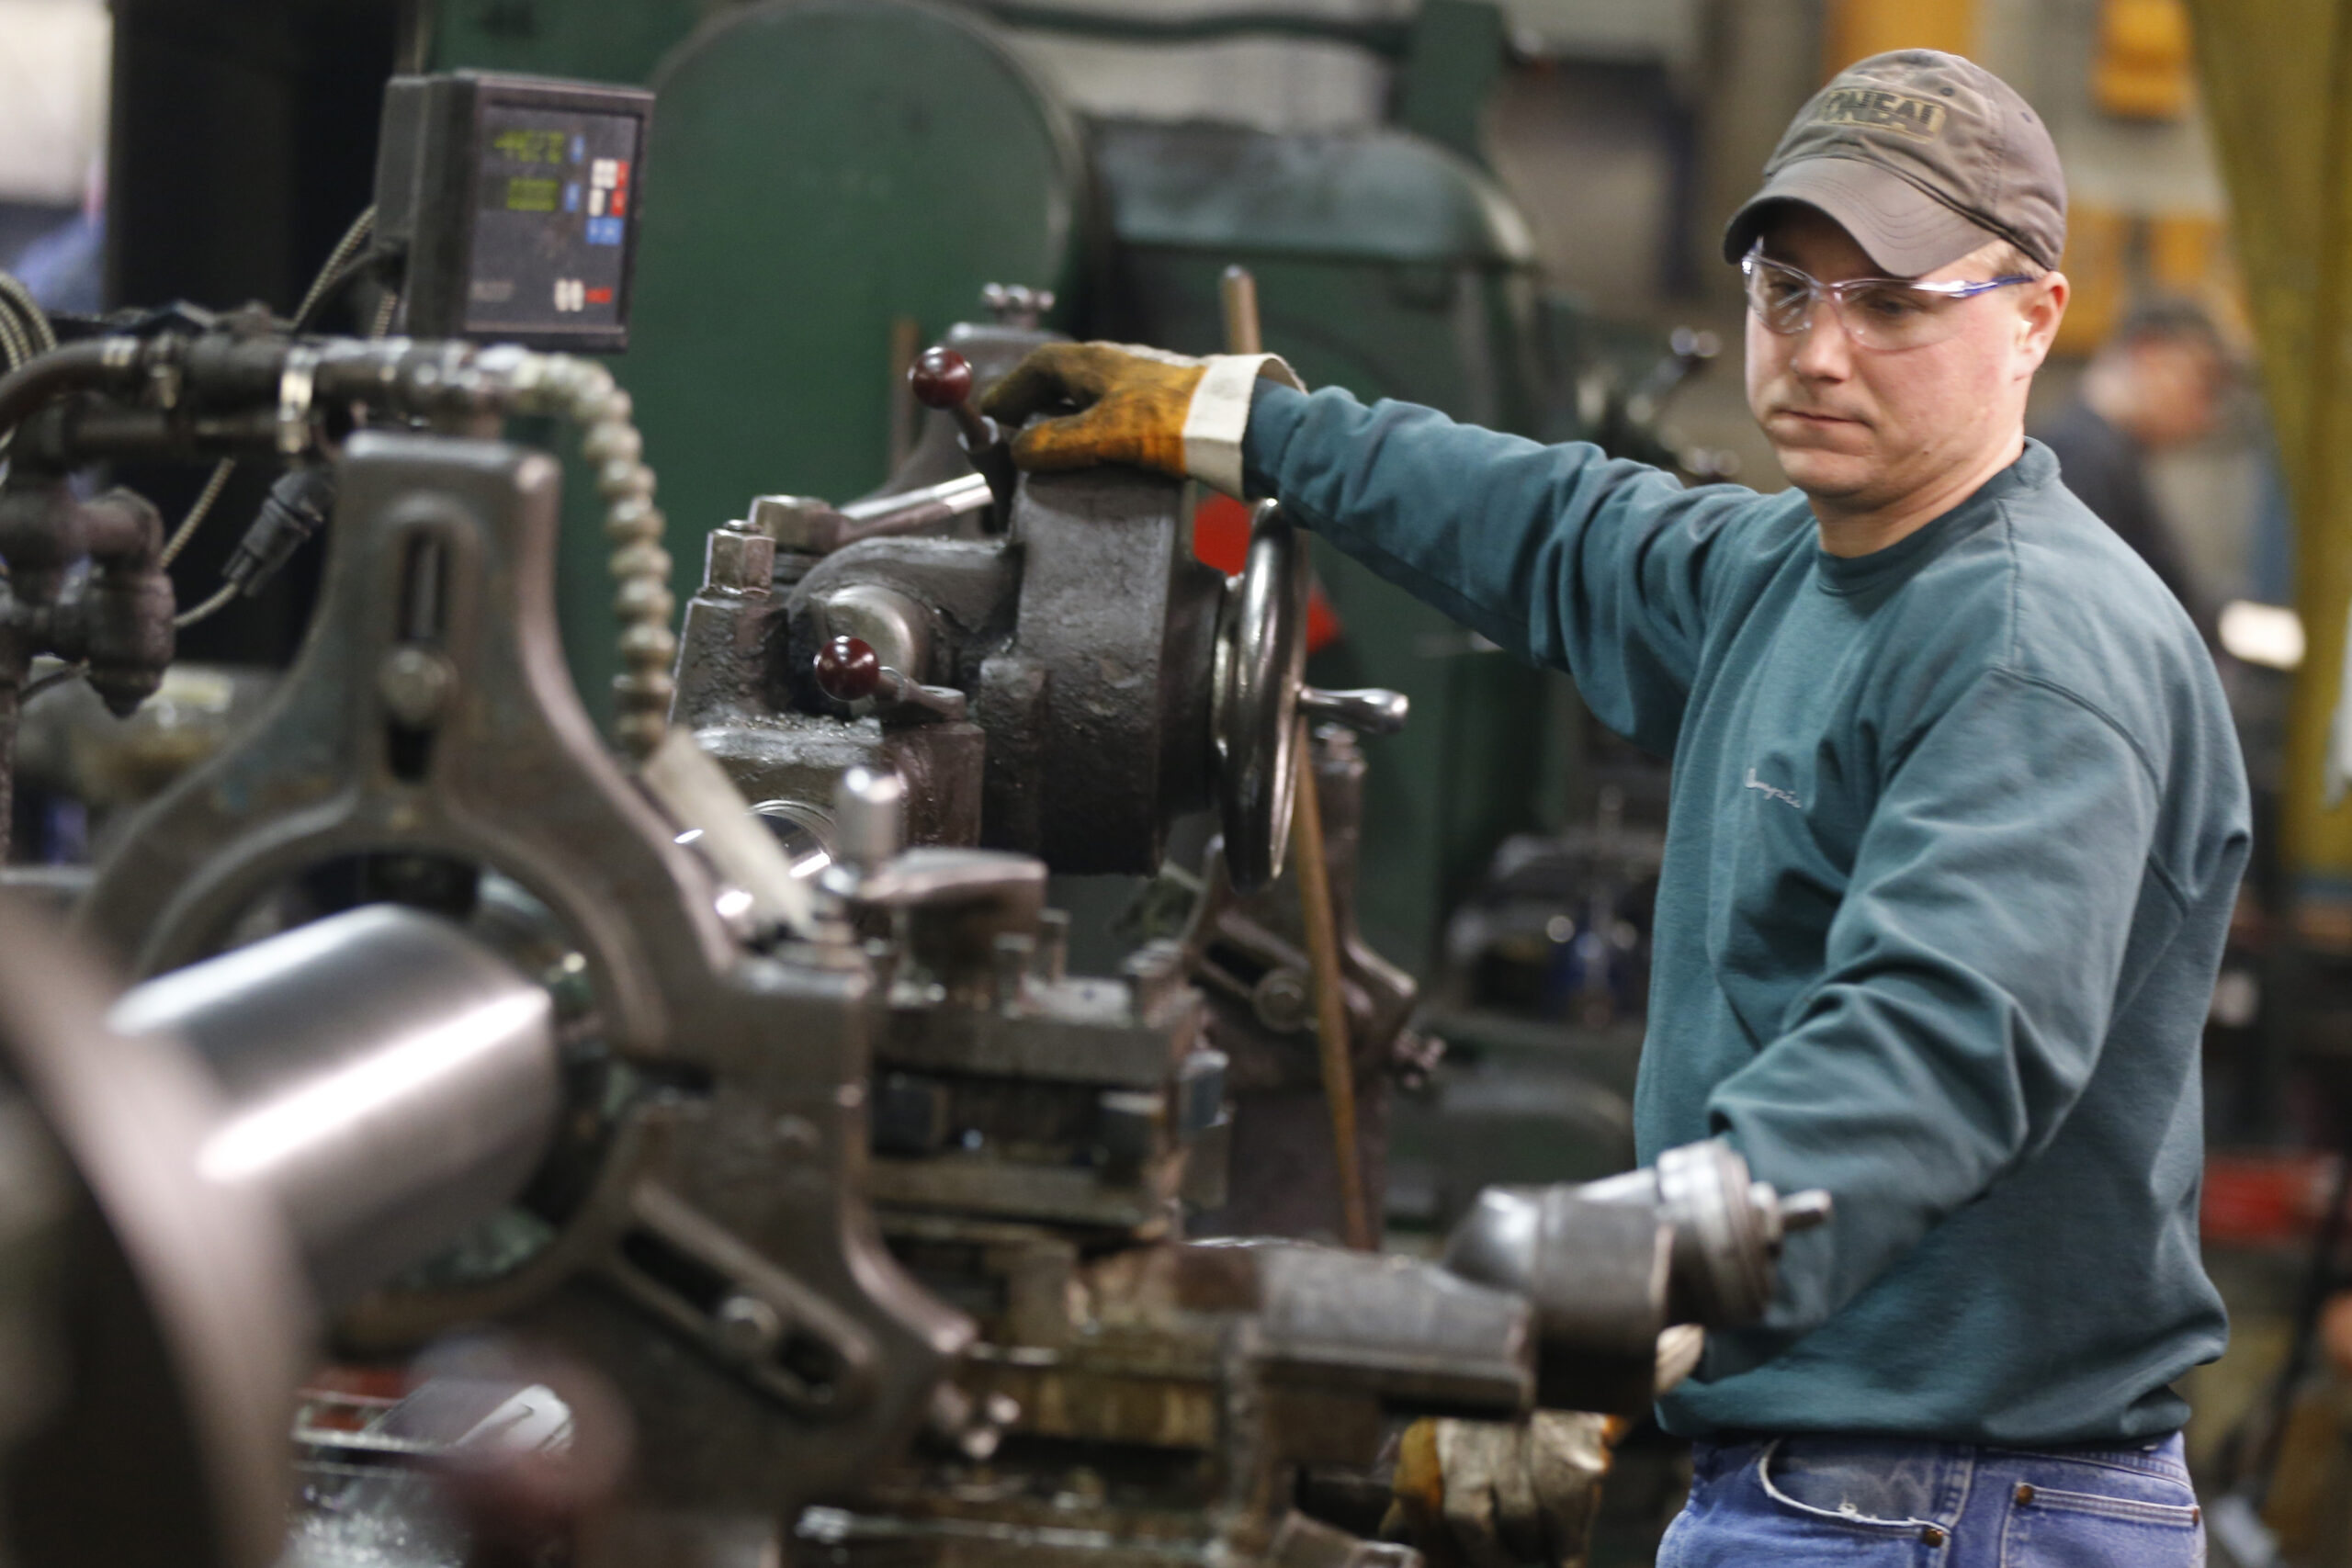 Despite low unemployment, new report shows Wisconsin’s economy is leaving some workers behind